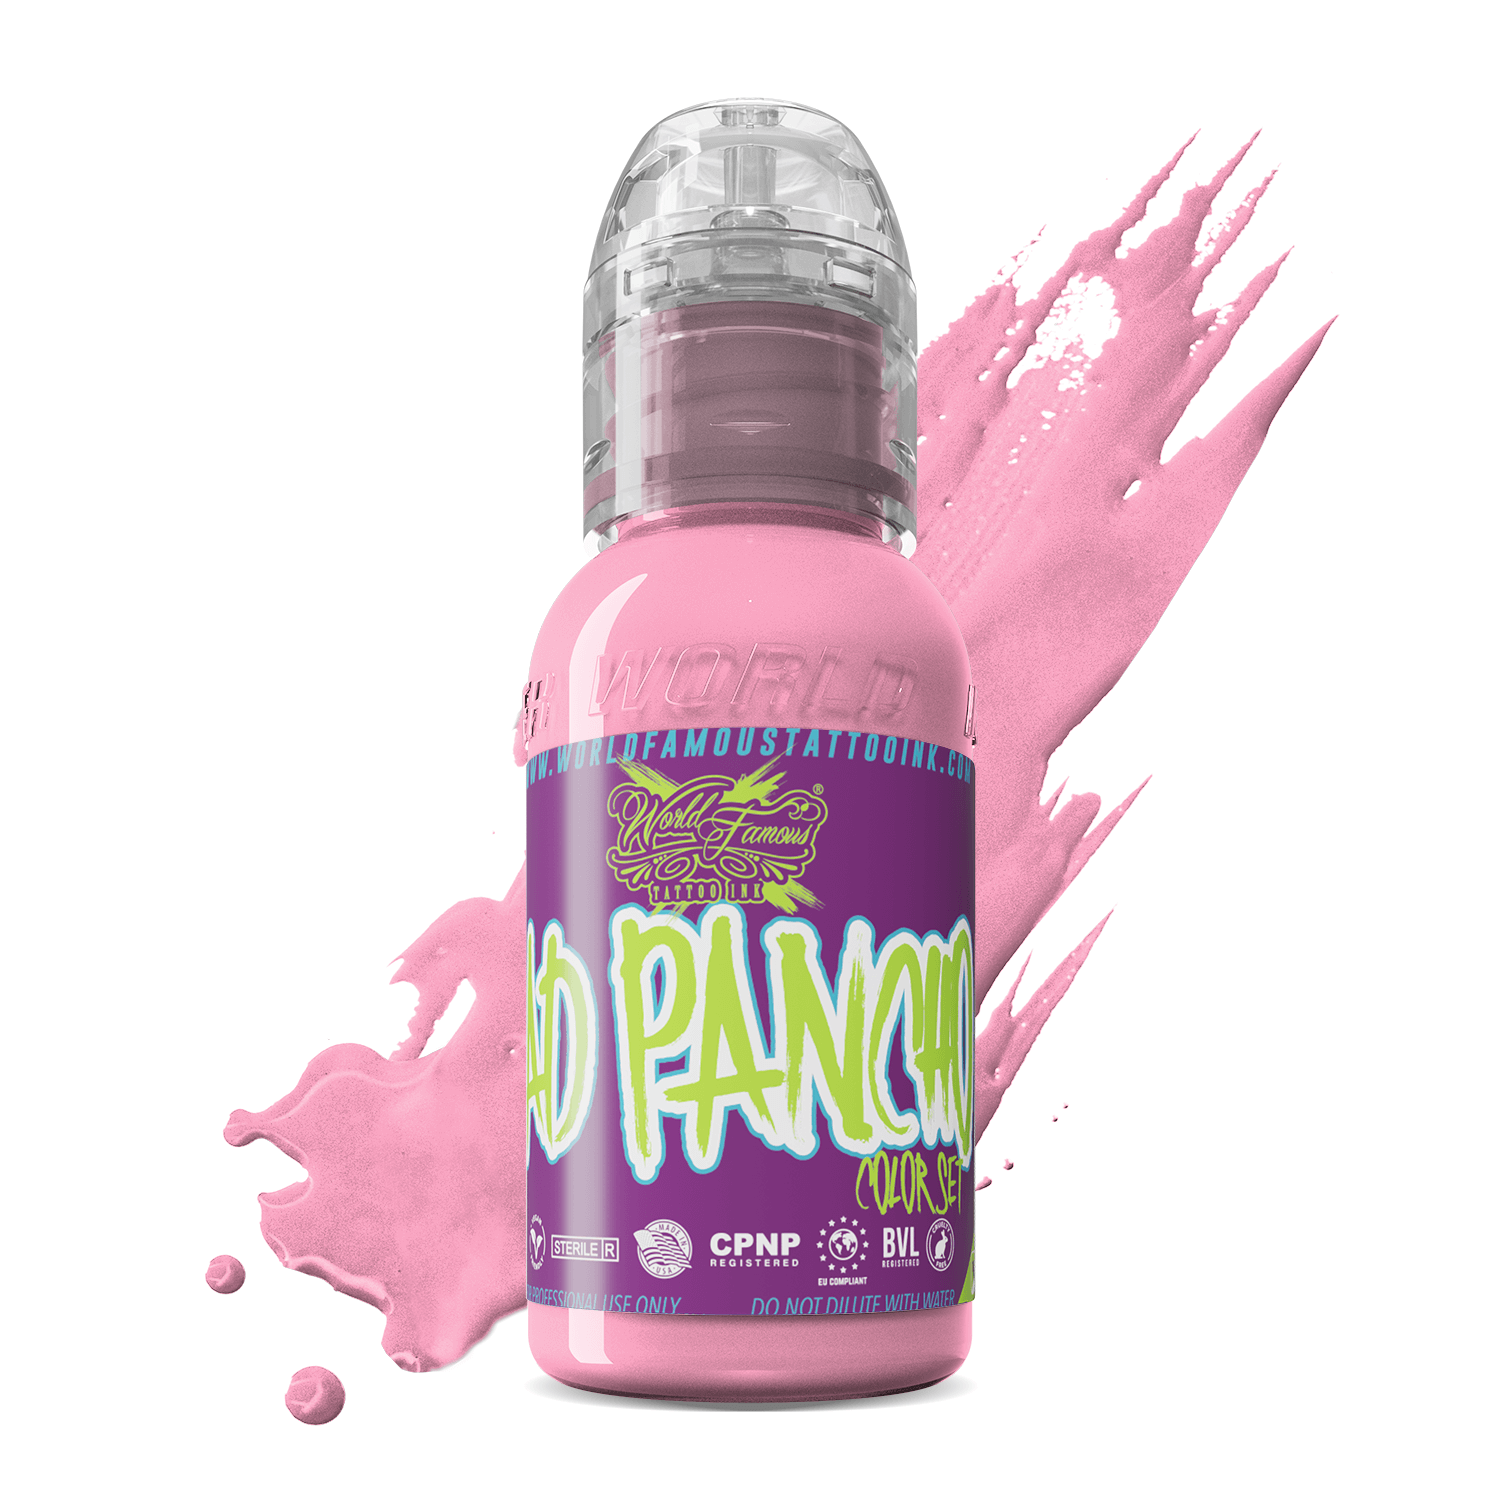 A.D. Pancho Proteam Color - Light Pink | World Famous Tattoo Ink